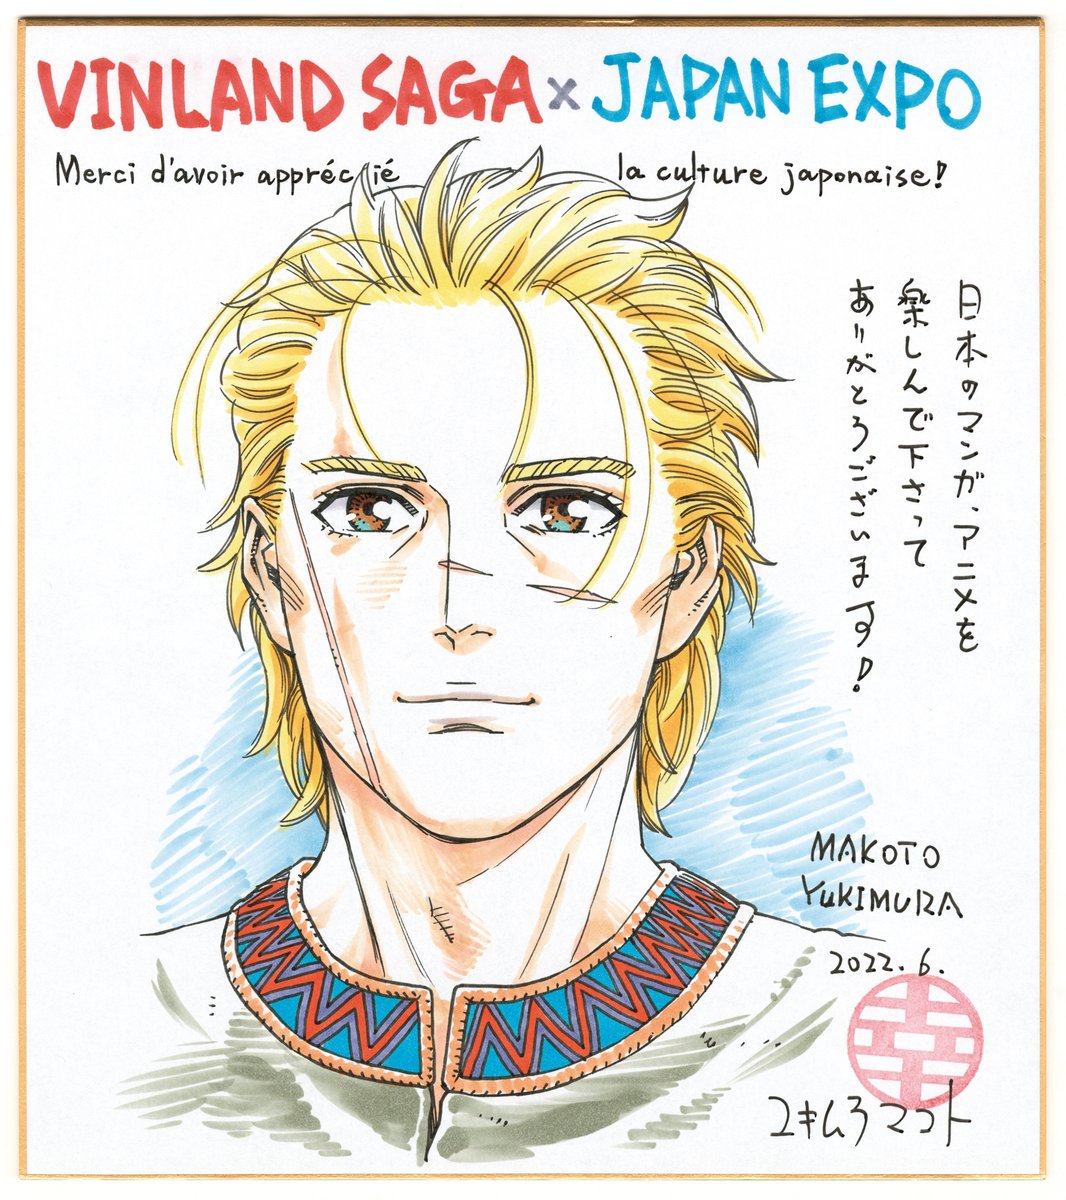 Tvアニメ ヴィンランド サガ Vinland Saga Official Original Illustration By Makoto Yukimura Is Now Available For Viewing We Are Pleased To Announce The Original Illustration Distributed At The Mappa Panel In Japan Expo Held